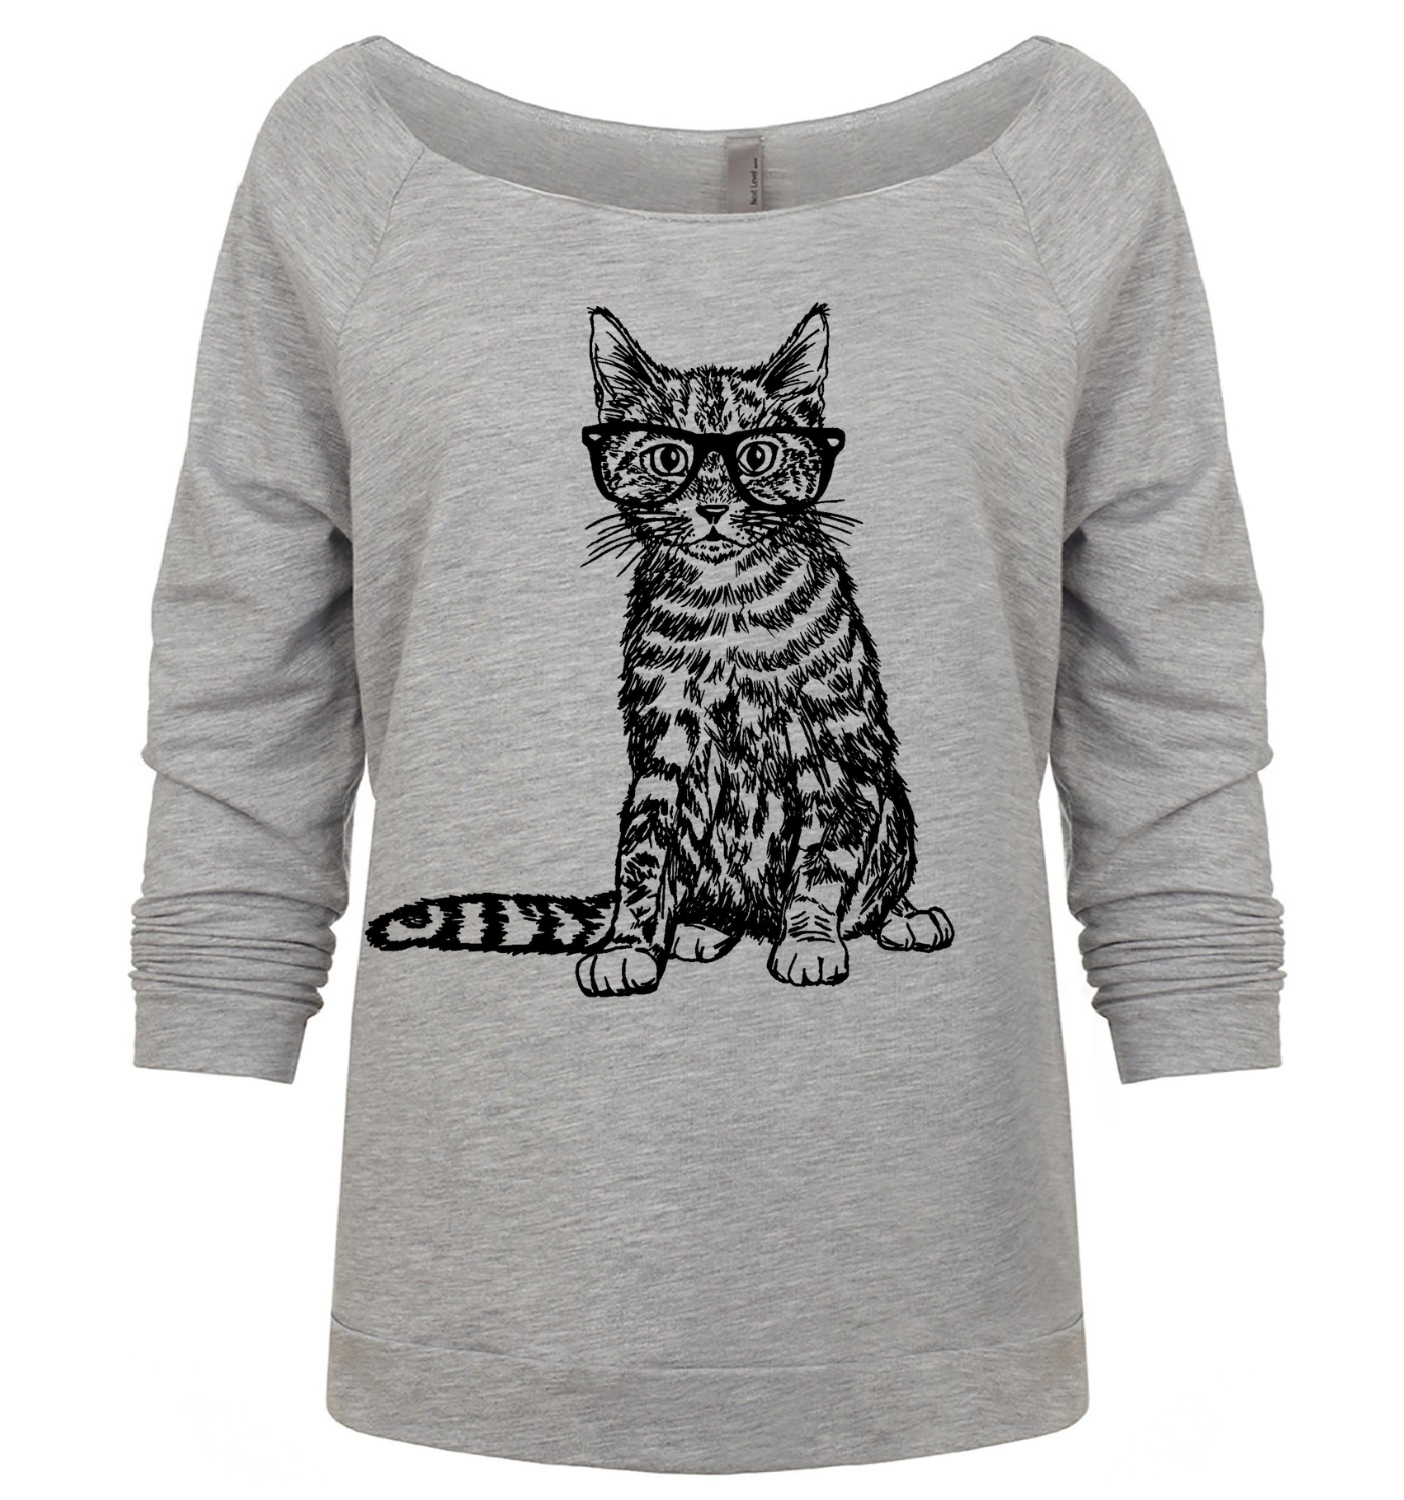 Cat with Glasses Ladies 3/4 Sleeve Boatneck Shirt